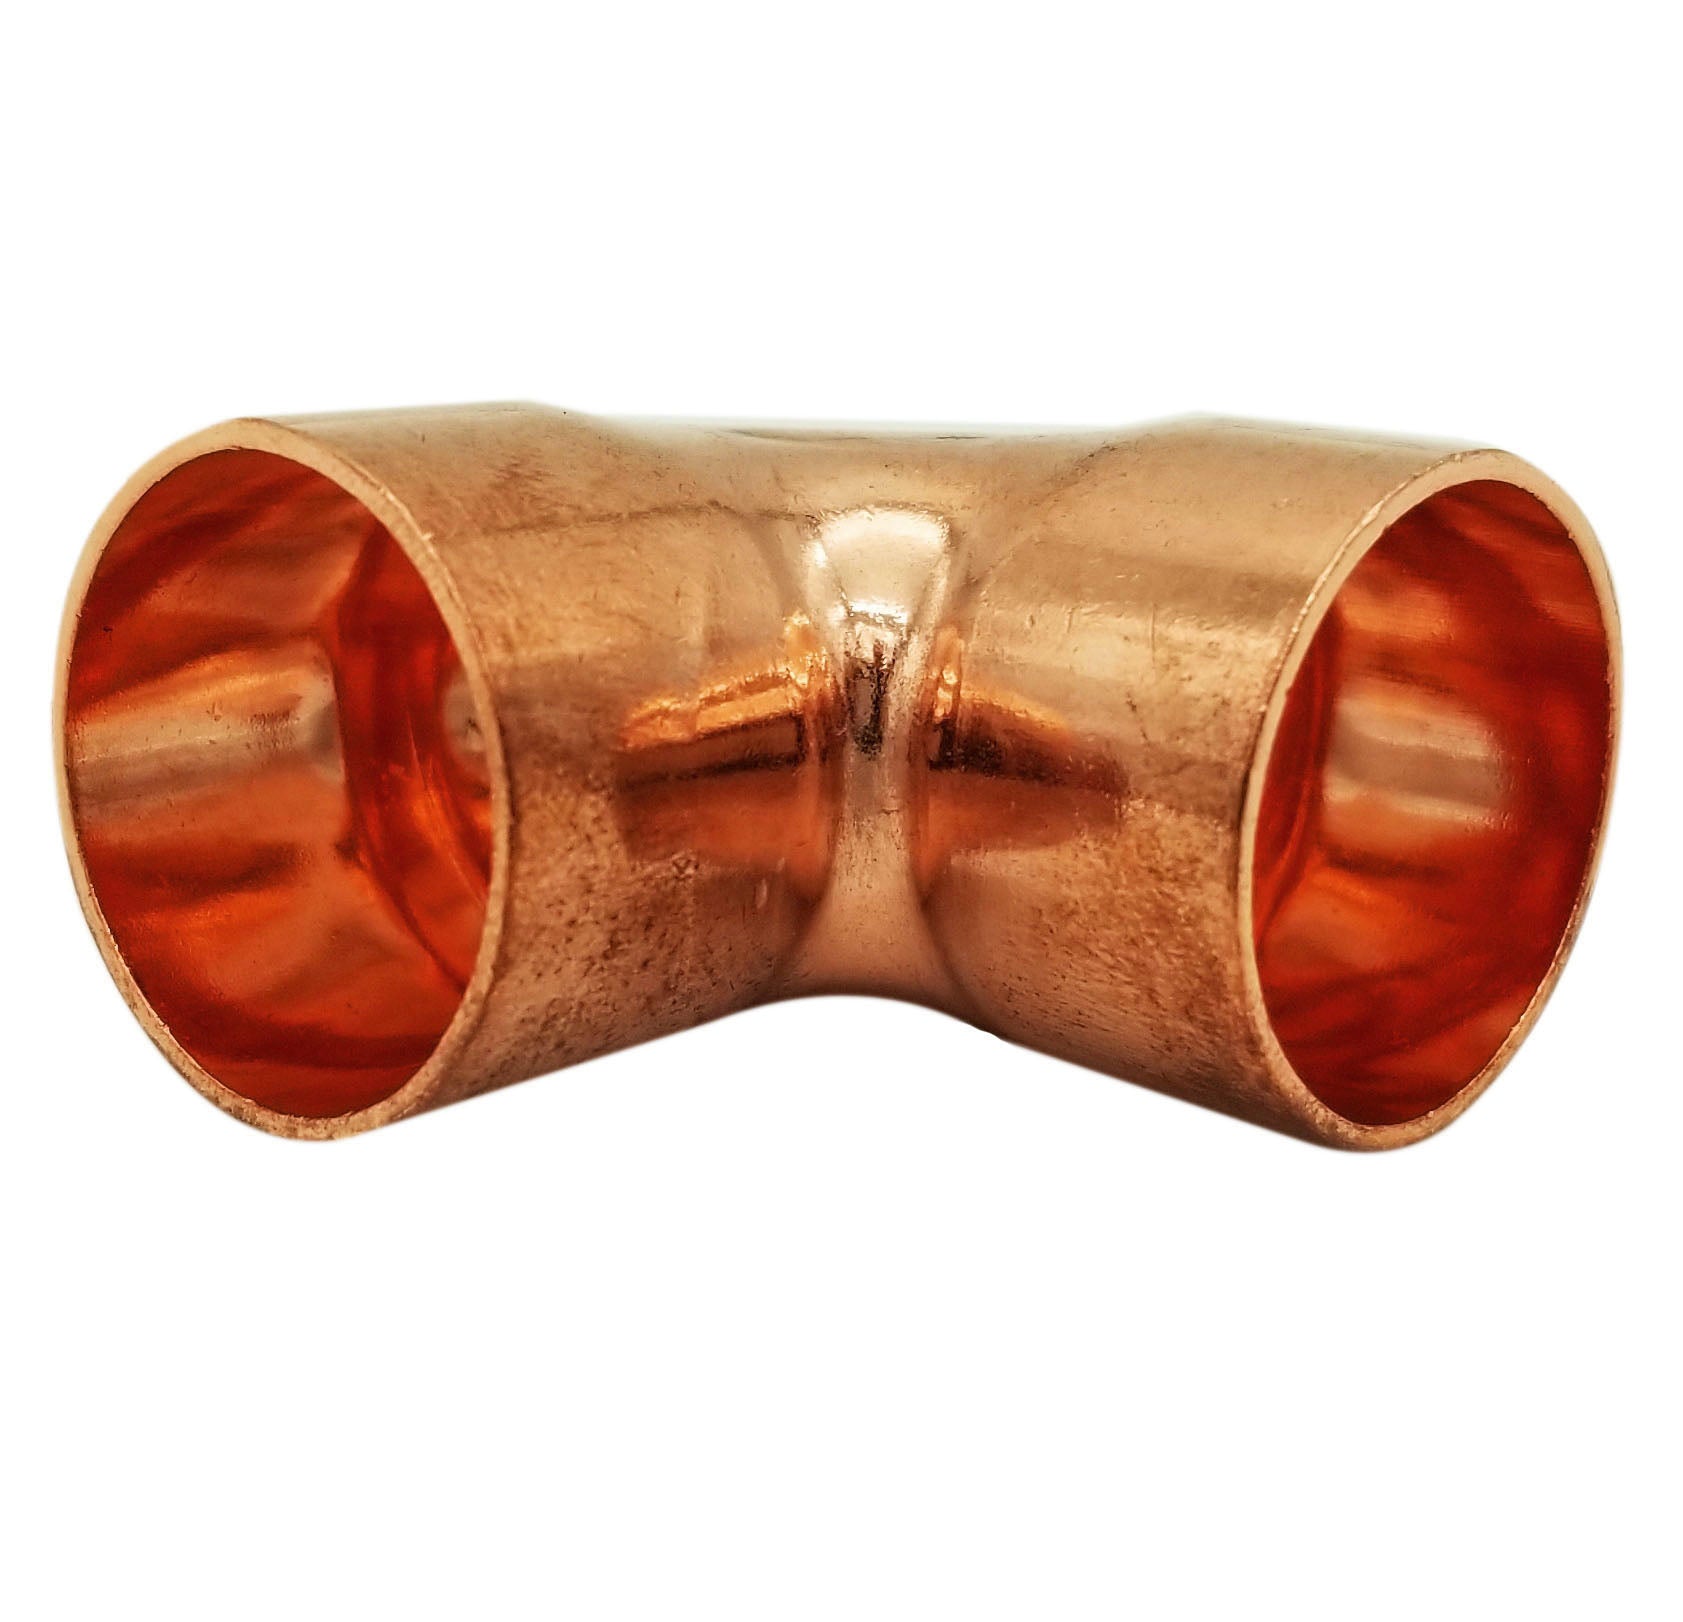 Copper Fitting 3/8 Inch (HVAC Outer Dimension) 1/4 Inch (Plumbing Inner Dimension) - 45 Degree Copper Pressure Elbow & HVAC – 99.9% Pure Copper - 10 Pack